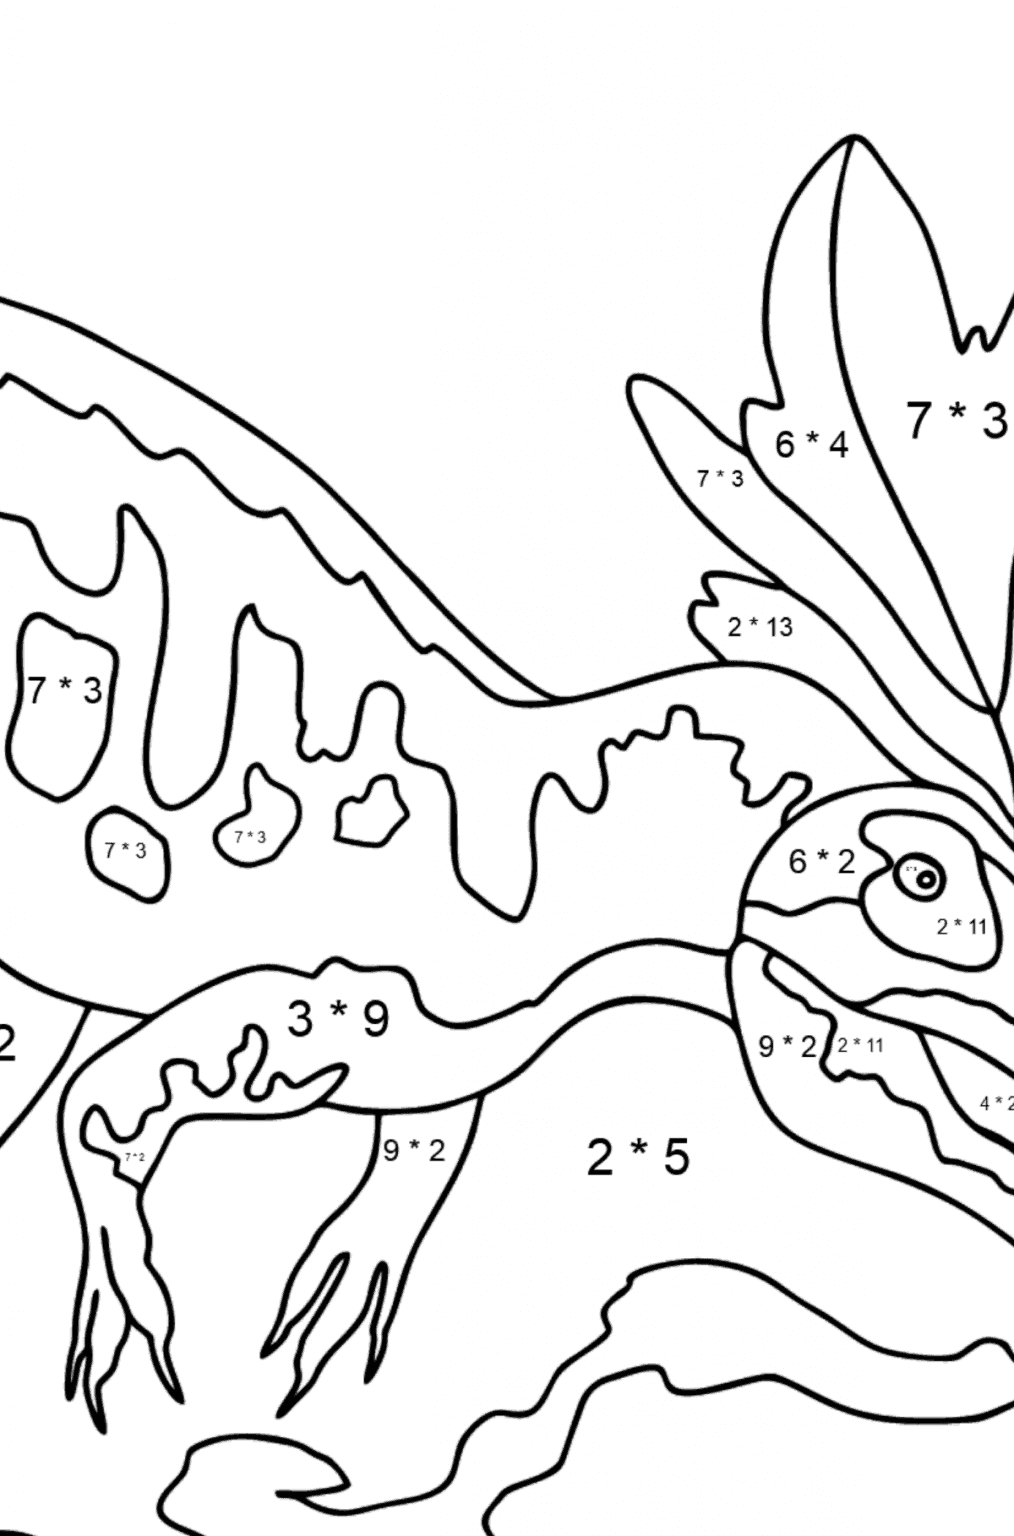 allosaurus-coloring-page-difficult-online-and-print-for-free